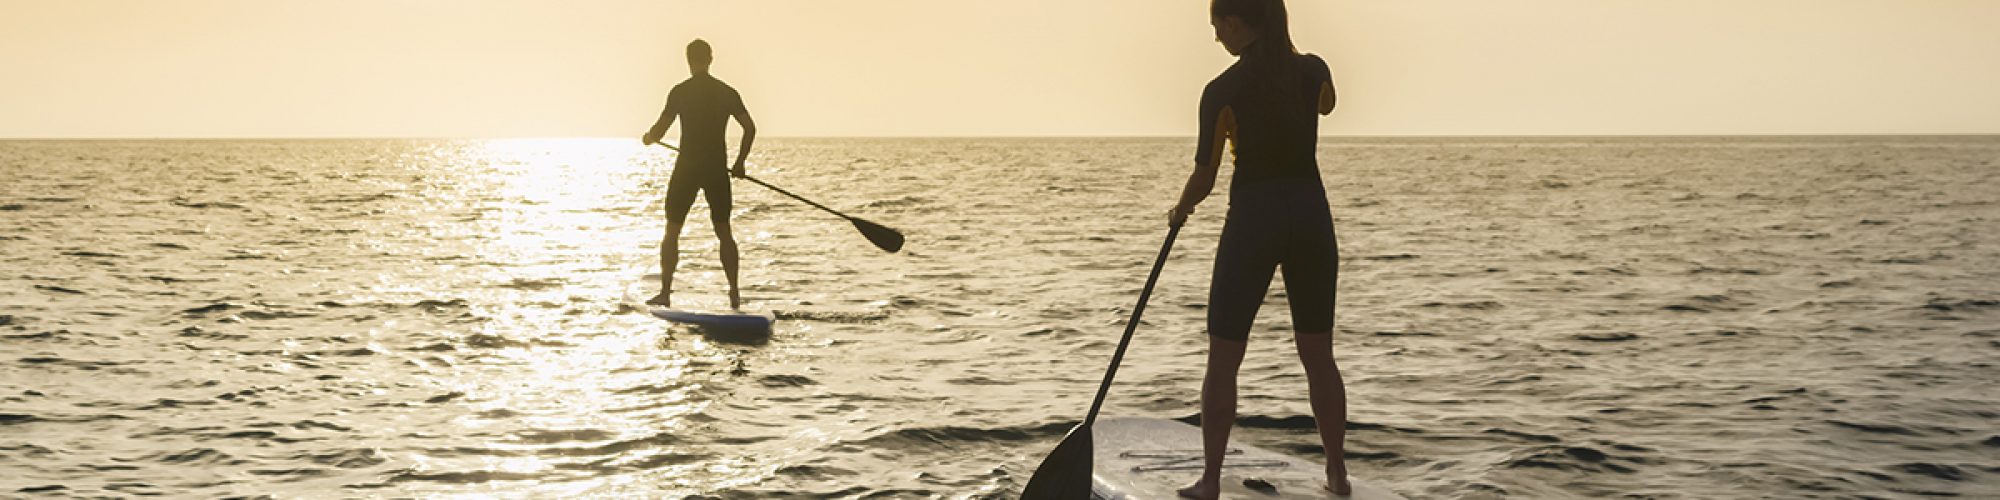 Man and woman doing standup paddling in sea during sunset.